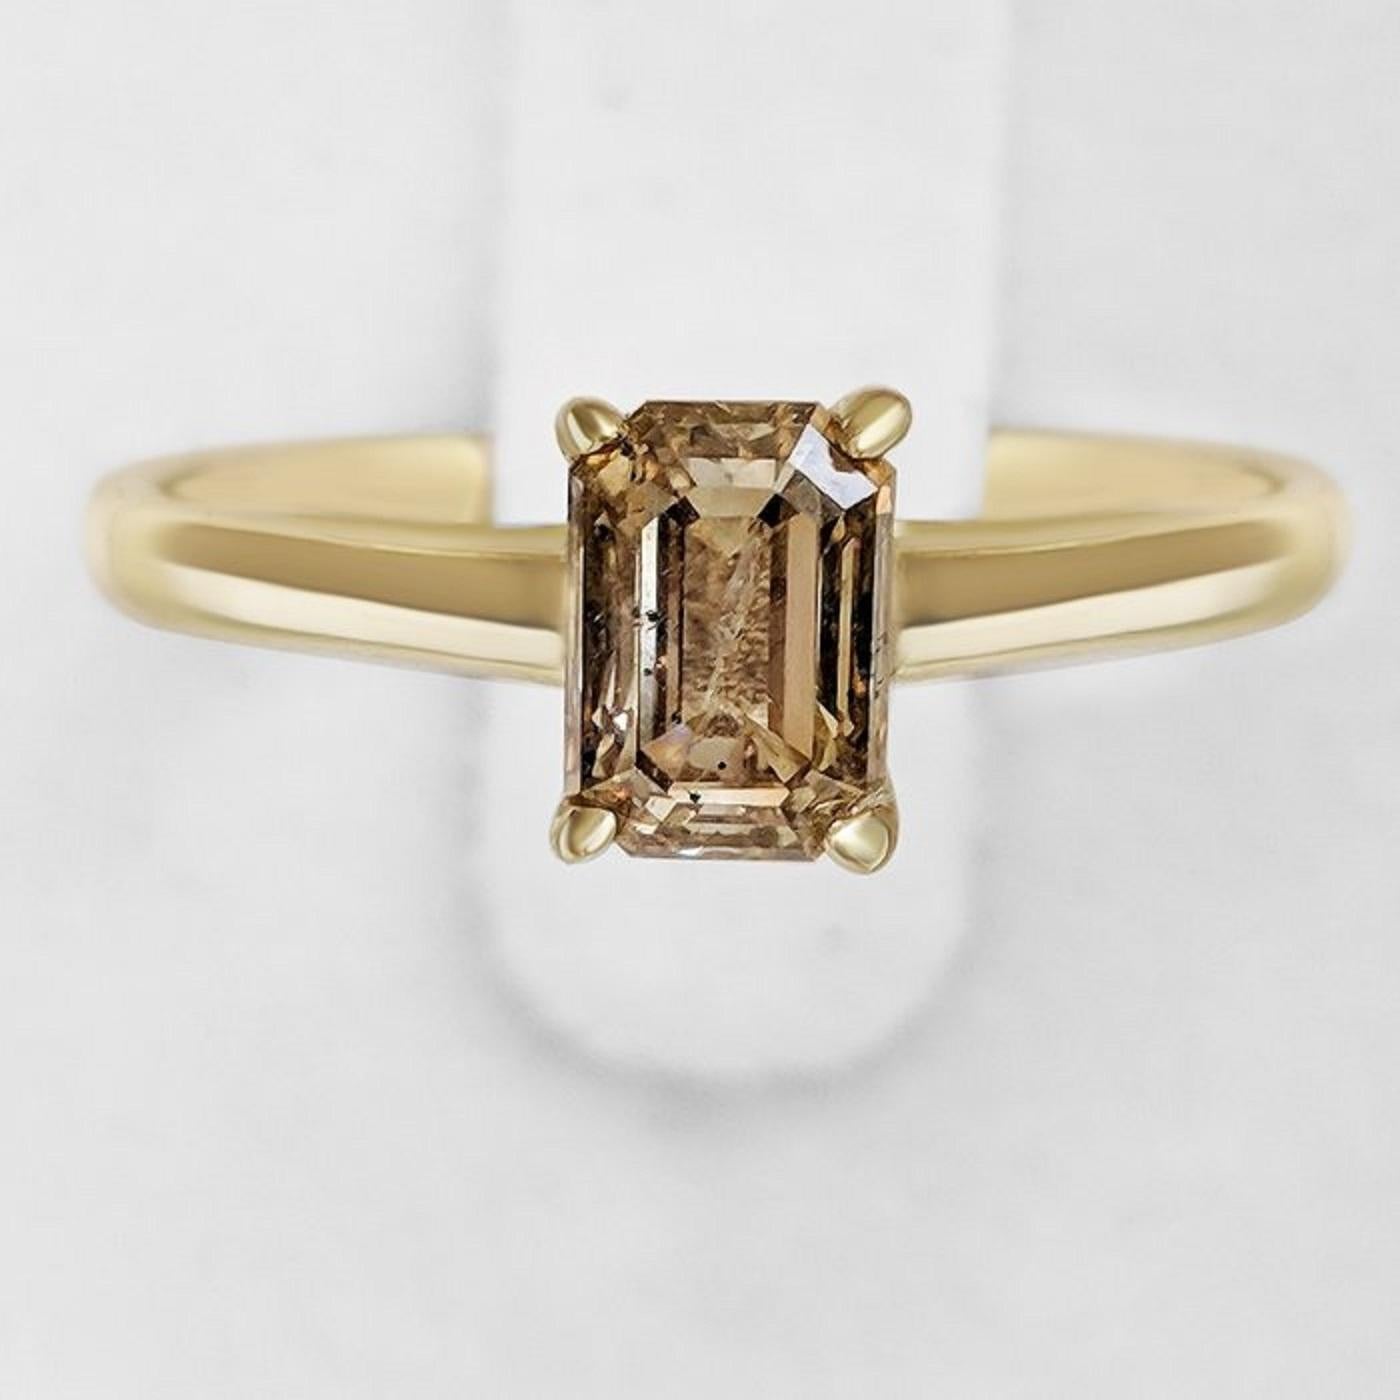 Ring can be sized free of charge prior to shipping out.

Ring size: 55 EU

Center Stone:
___________
Natural Diamond
Cut: Emerald
Carat: 1.00 carat
Color: Natural Fancy Yellowish Brown
Clarity: I1

Item ships from Israeli Diamonds Exchange,